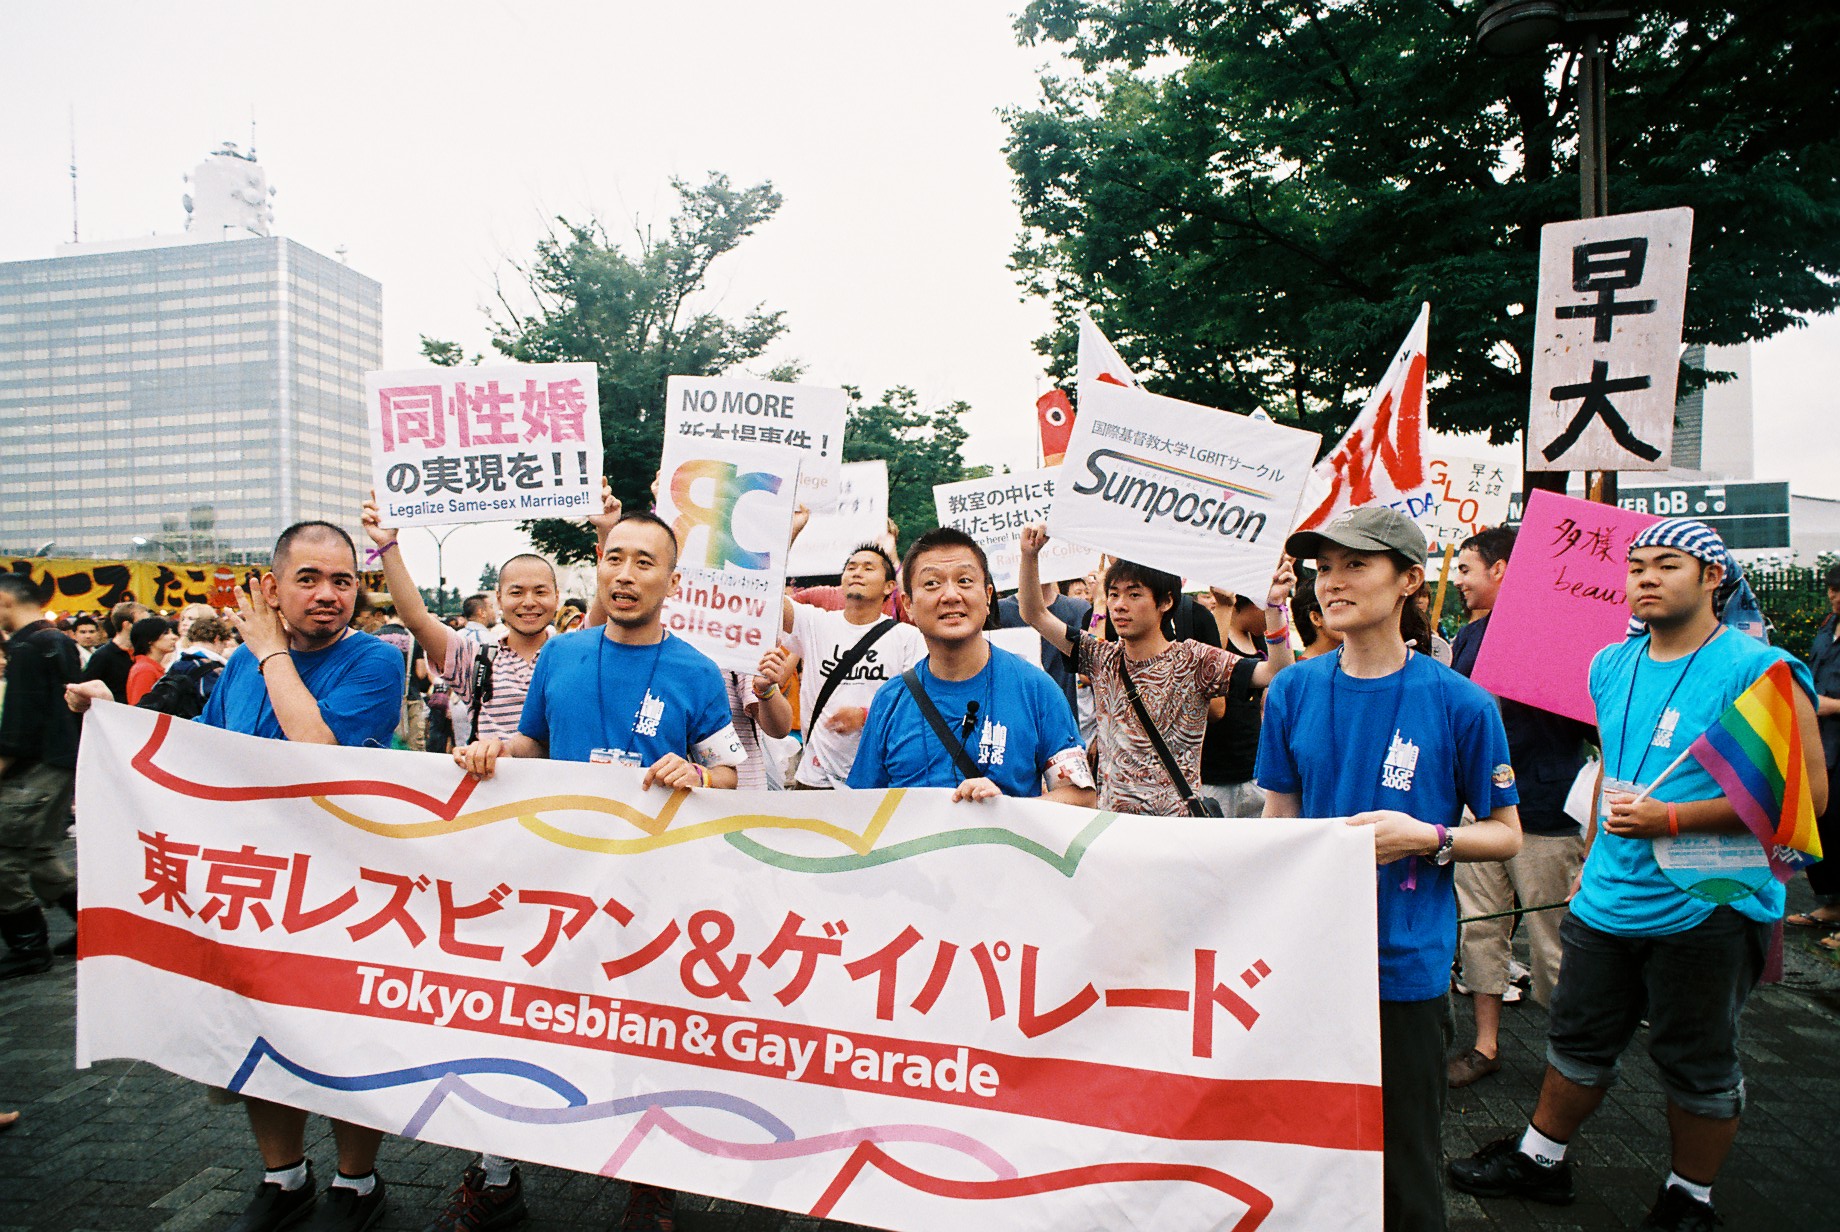 issue_images_90_1_Takao_lgbt-policy-japan-ea-image01